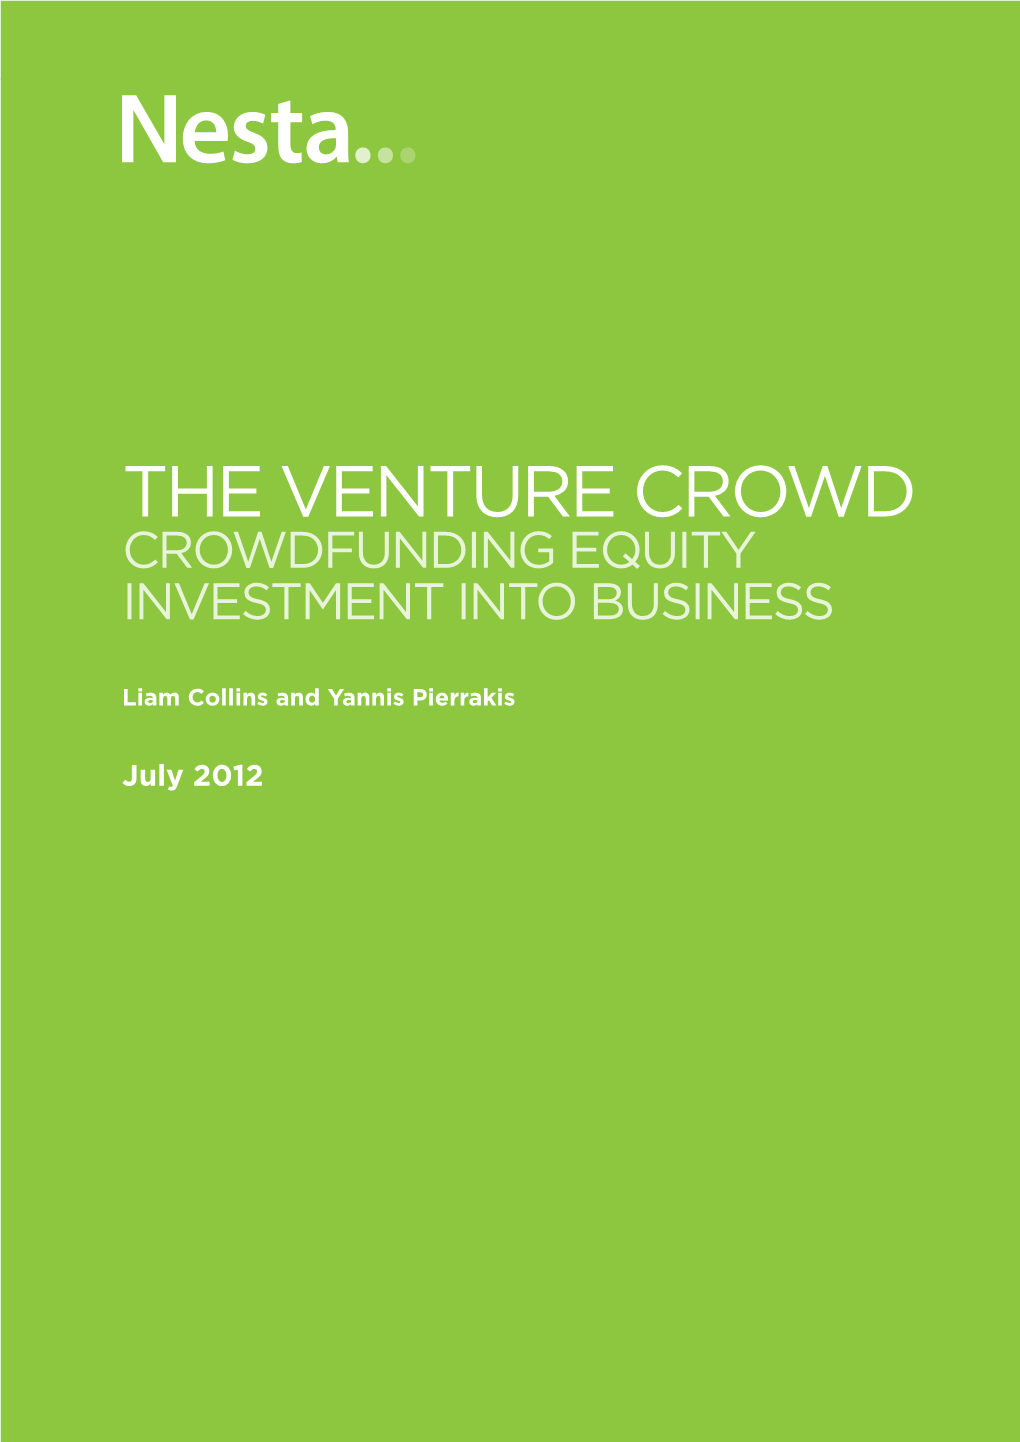 The Venture Crowd Crowdfunding Equity Investment Into Business